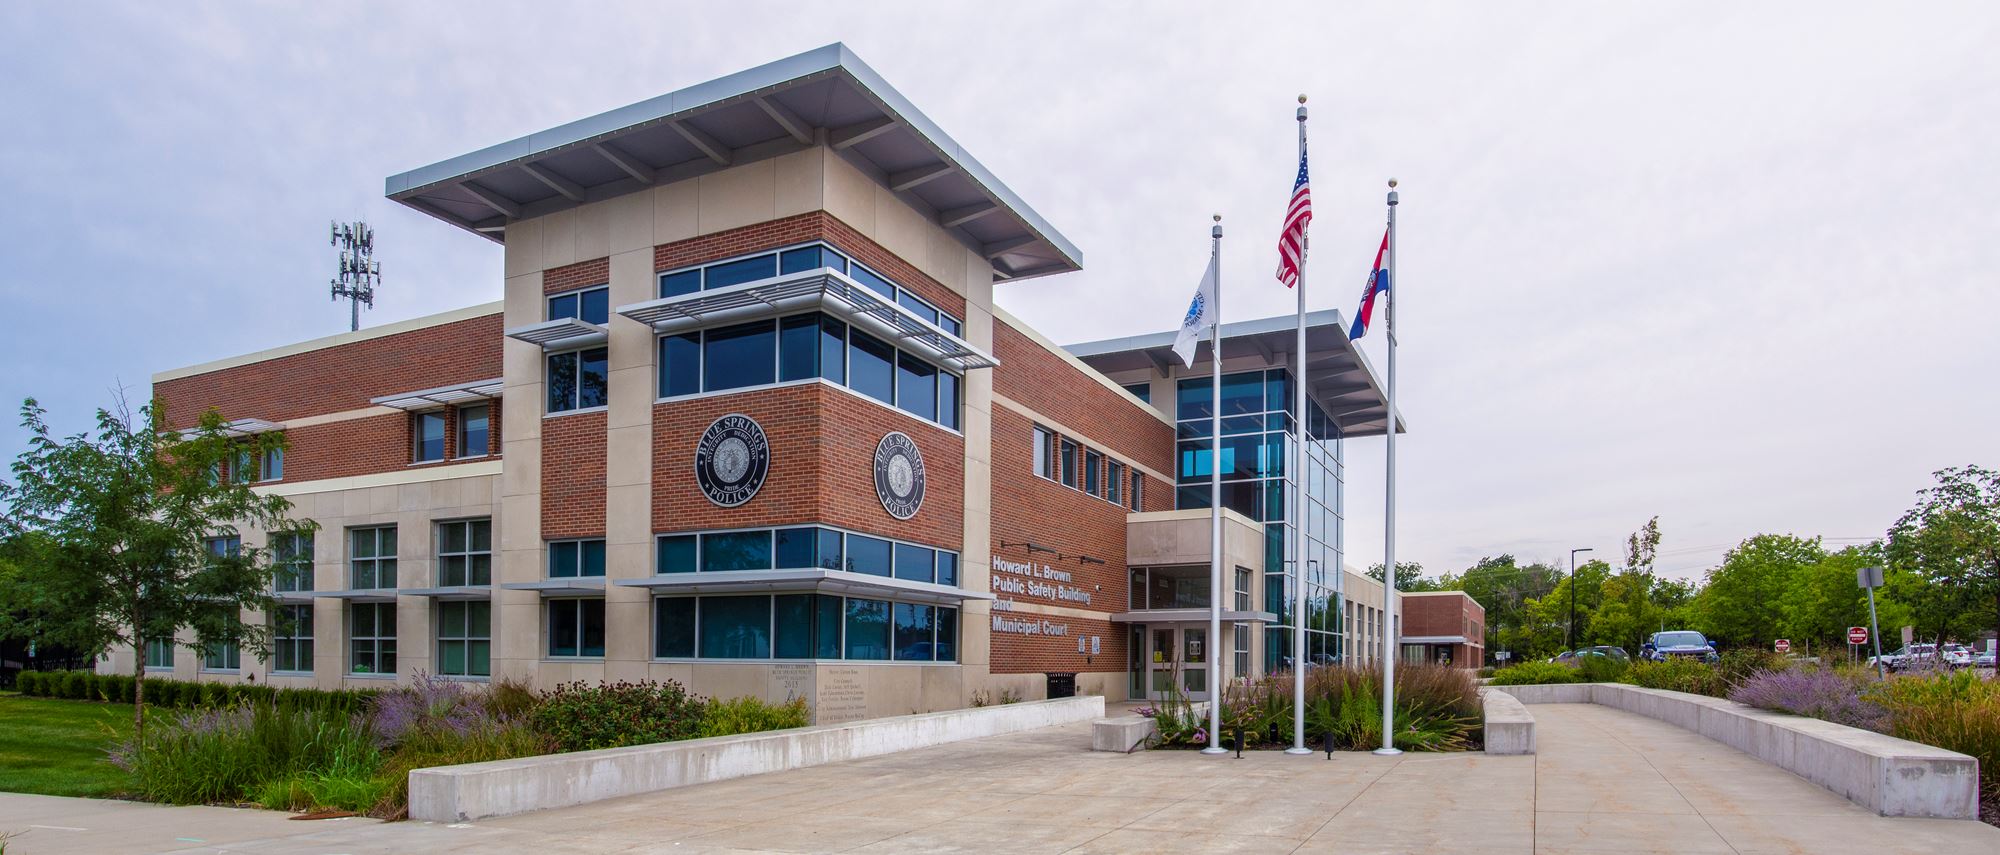 Image of City of Blue Springs Police Department